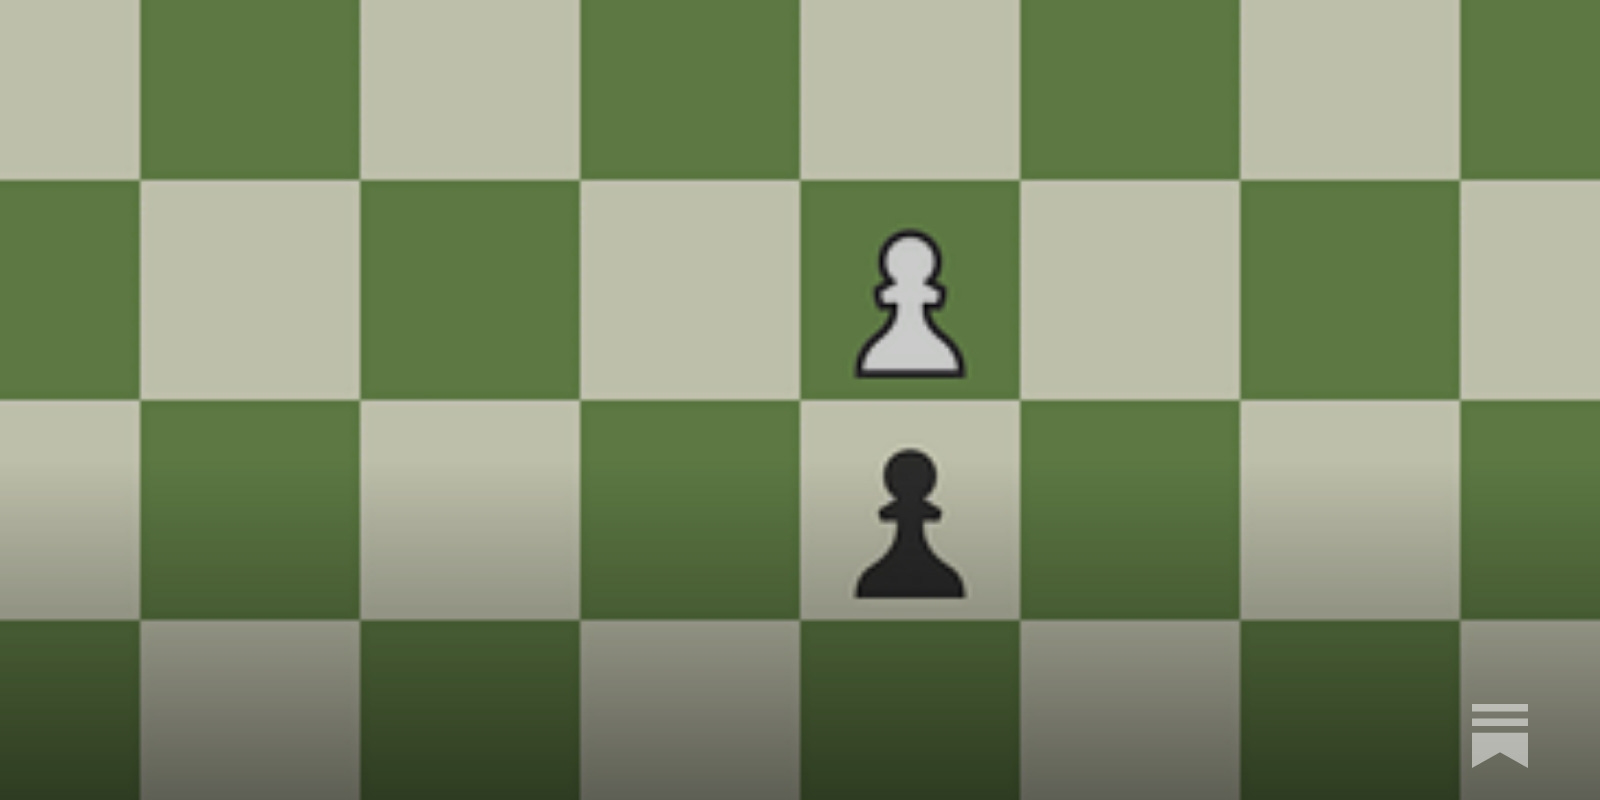 Chessable Courses in the Learning Section - Are people using this